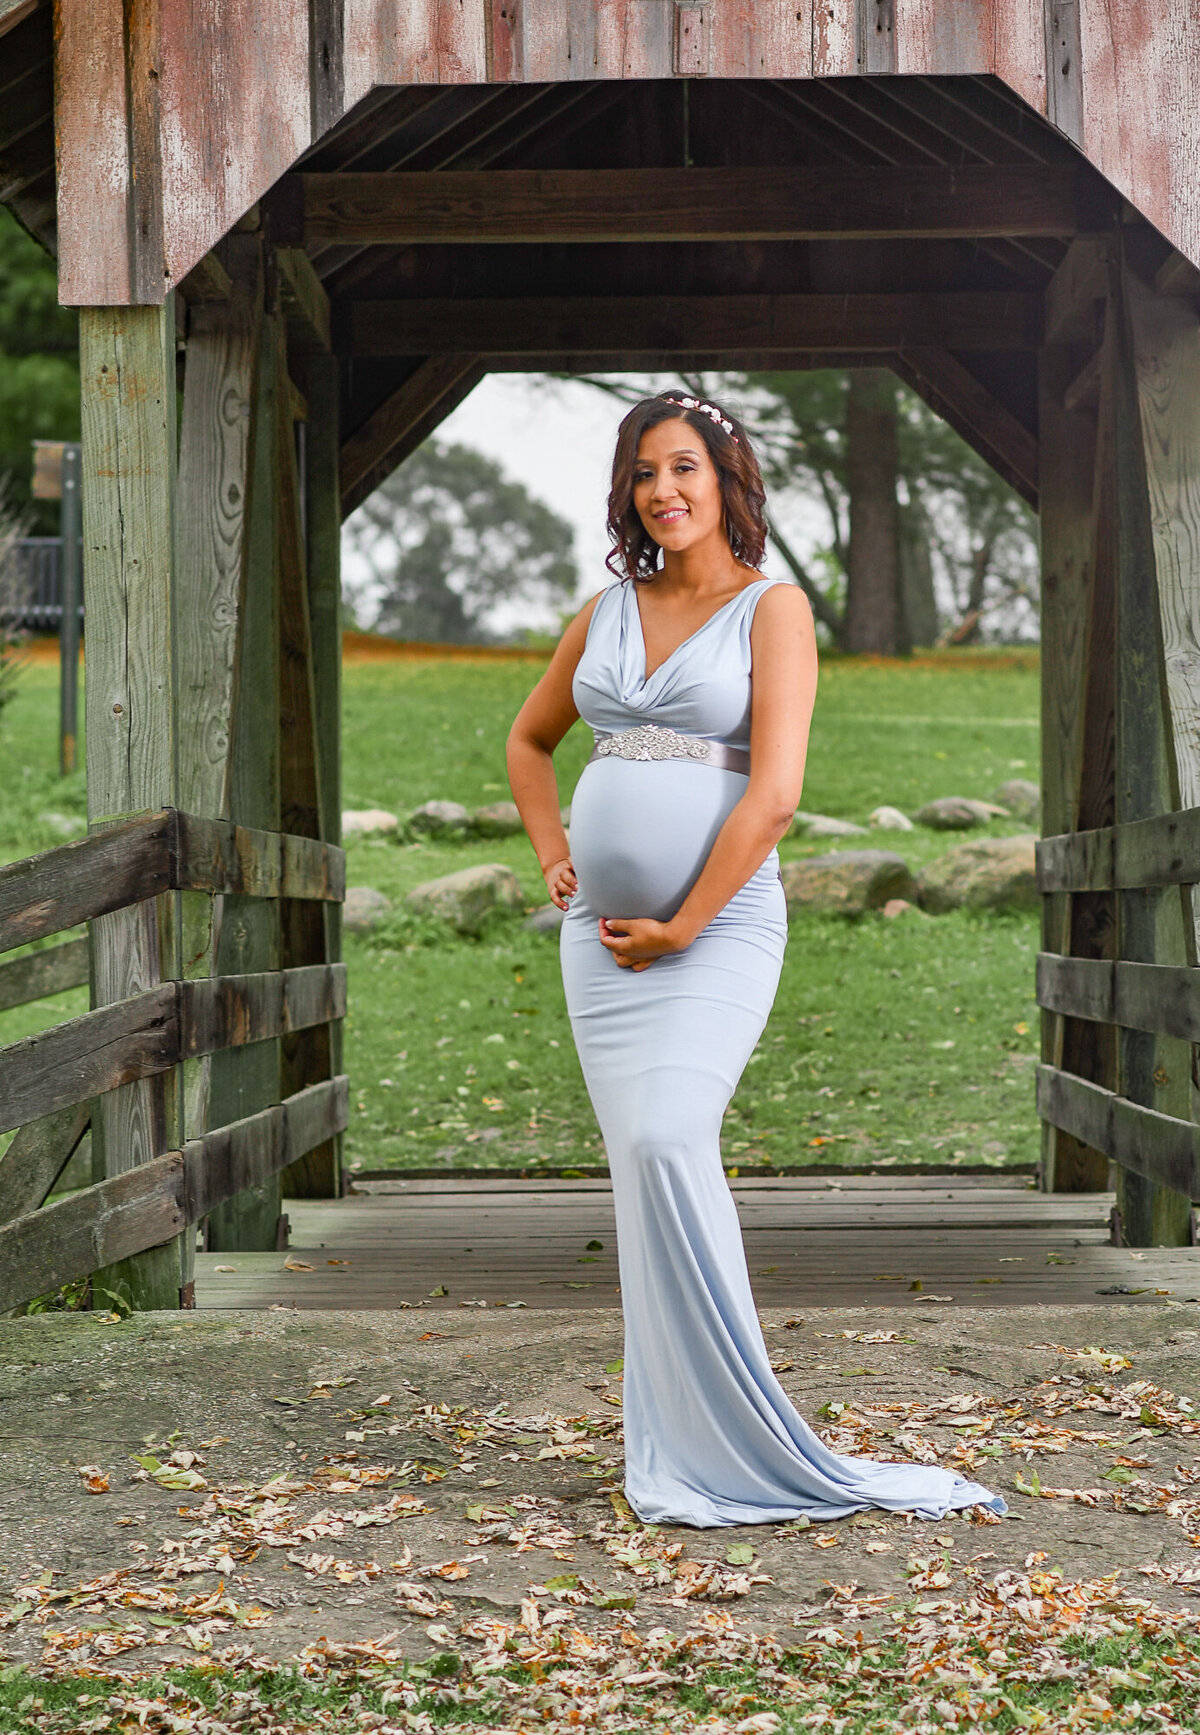 Pregnant woman in a long maternity gown photographed at a park on a covered bridge in Beloit, Wisconsin